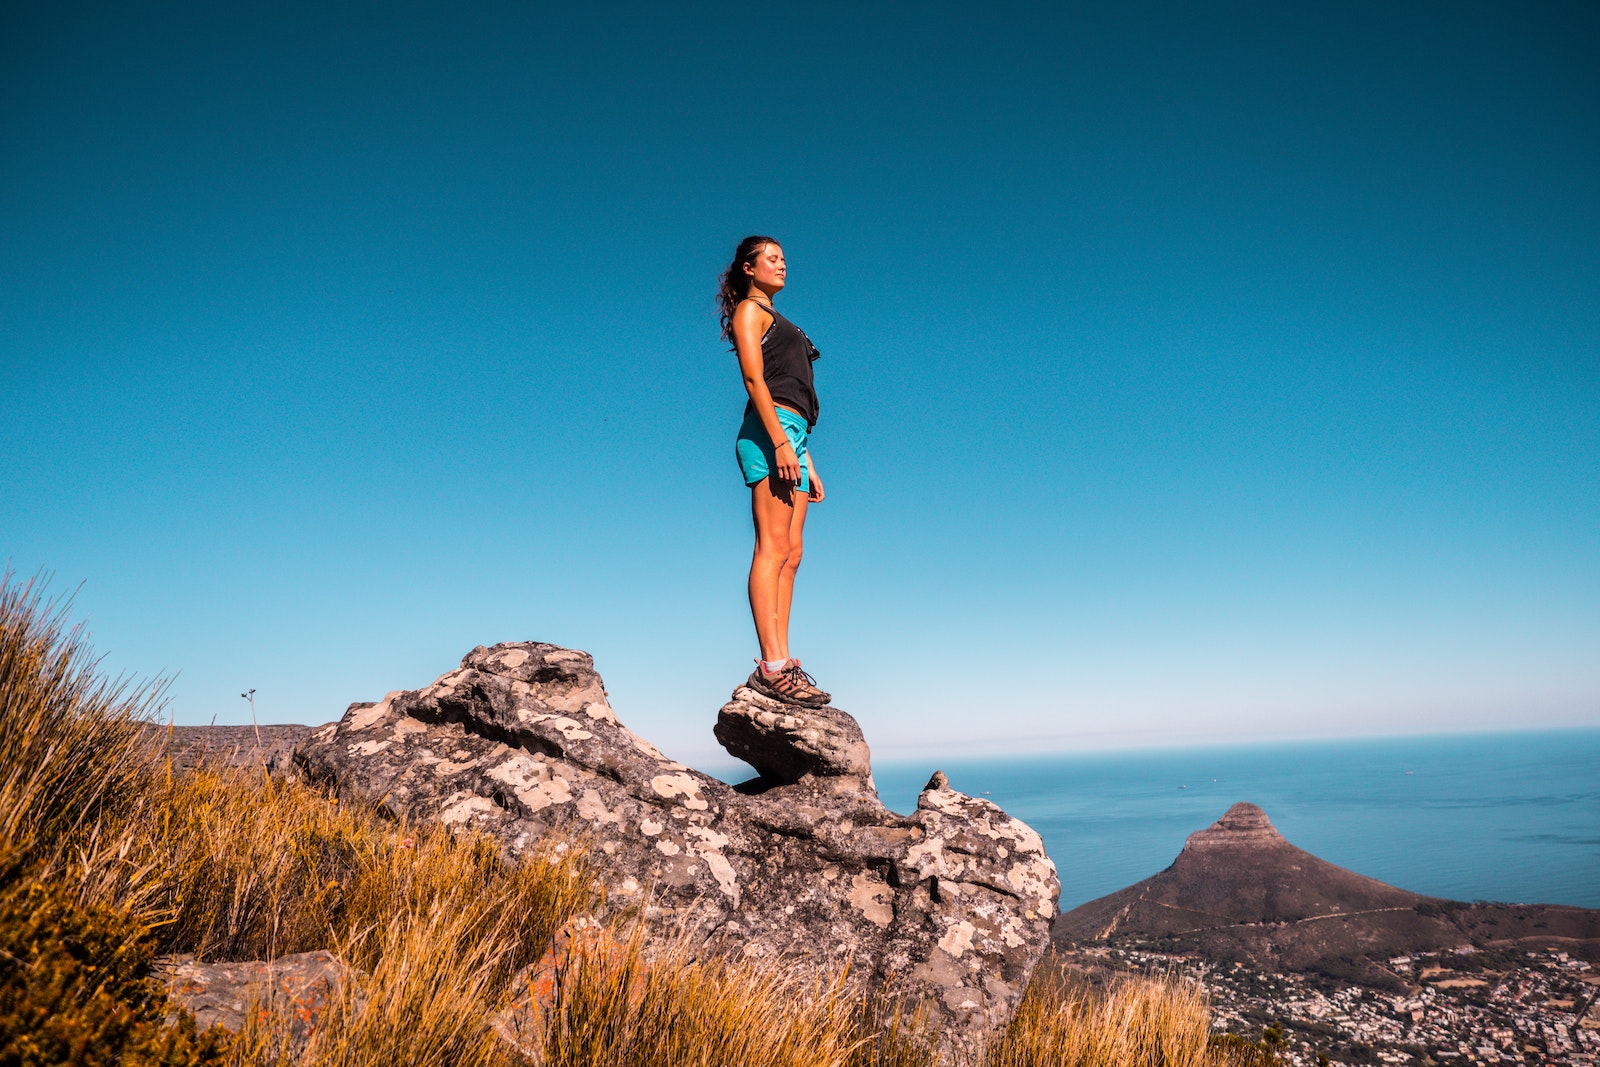 Benefits of Hiking for Health and Well-Being mental clarity